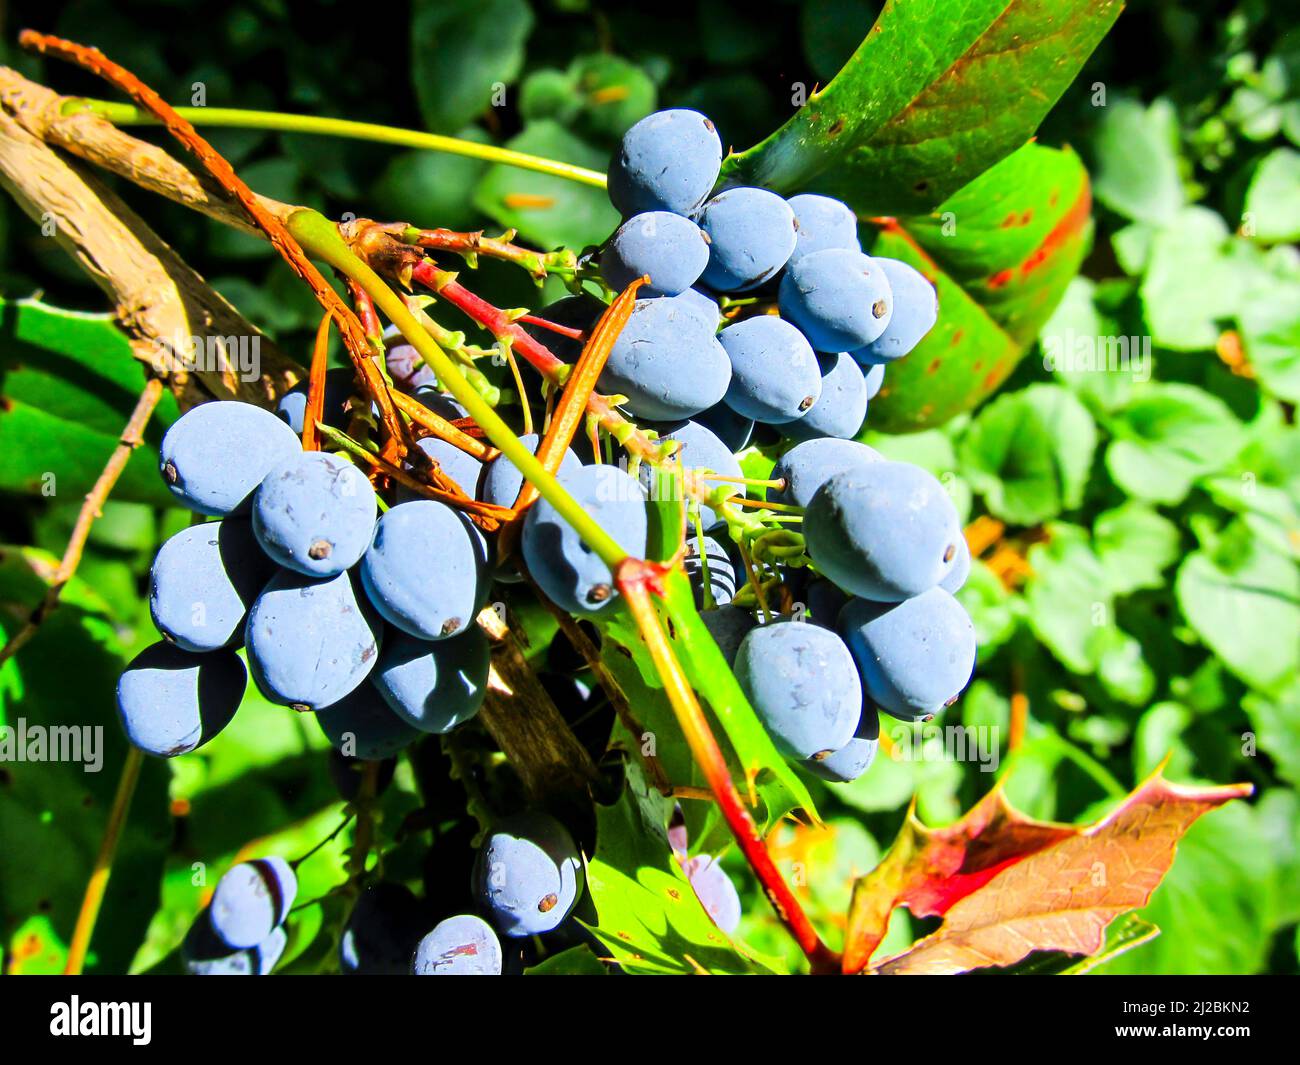 Close up view of the berries of a Holly leaved Oregon Grape, Berberis Aquifolium, photographed in Whiteleaf, England UK Stock Photo